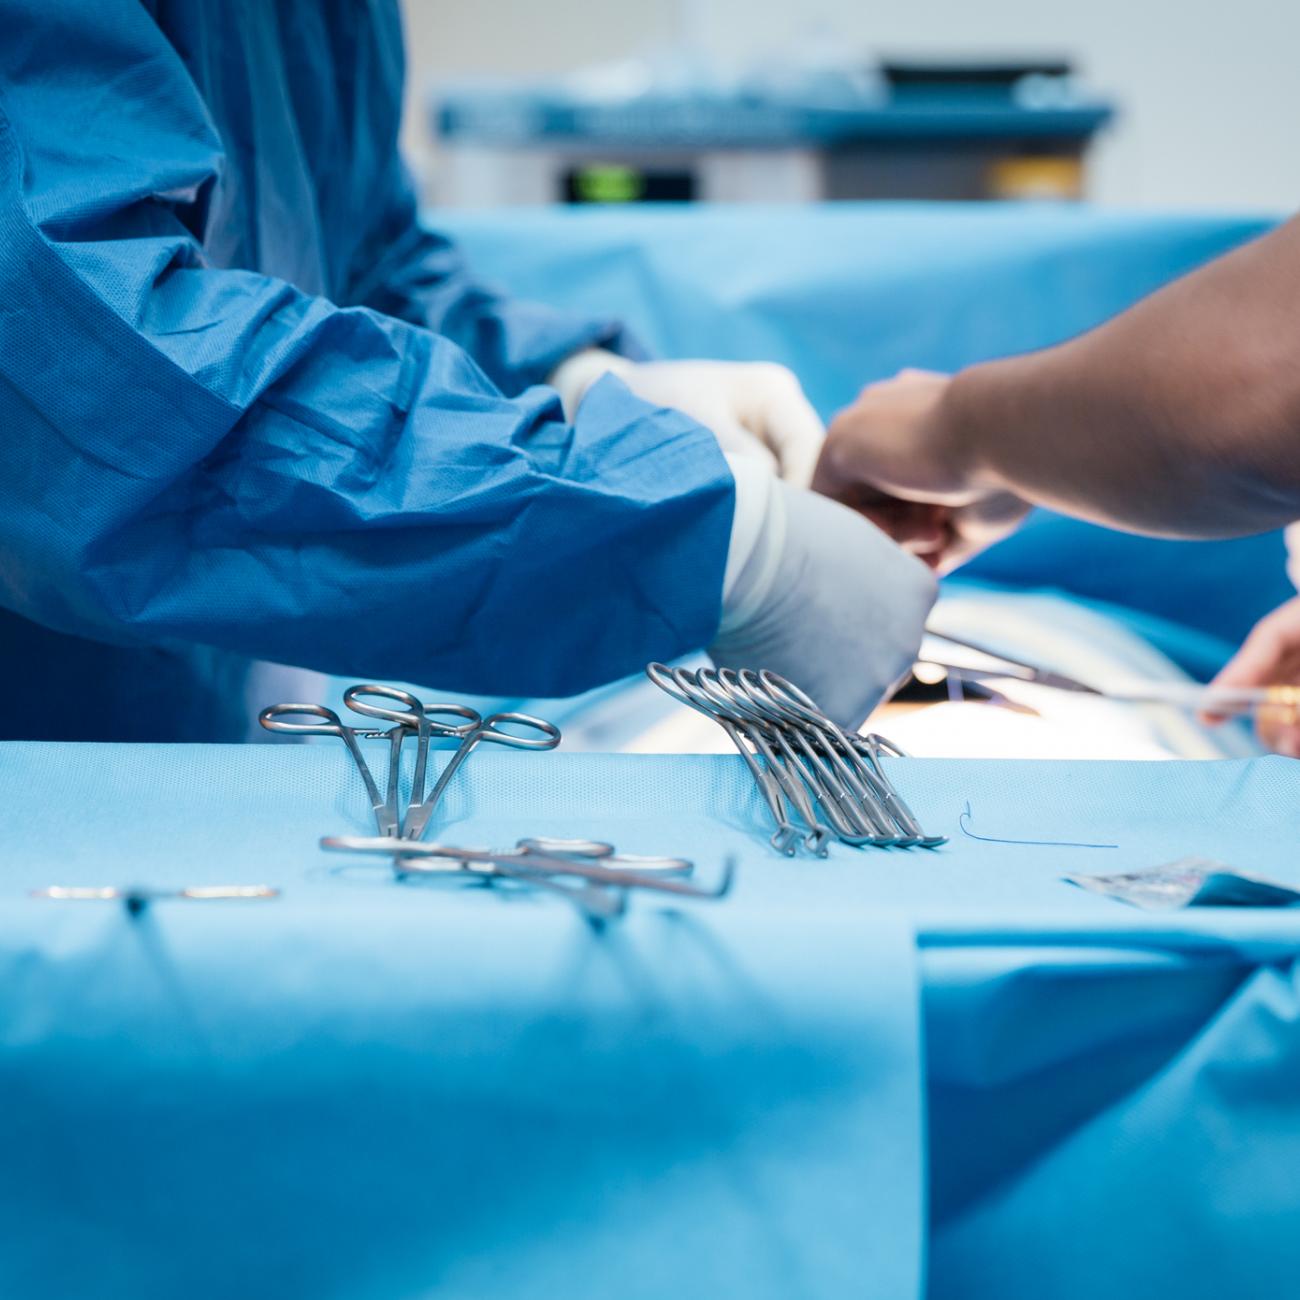 photograph of surgical procedure